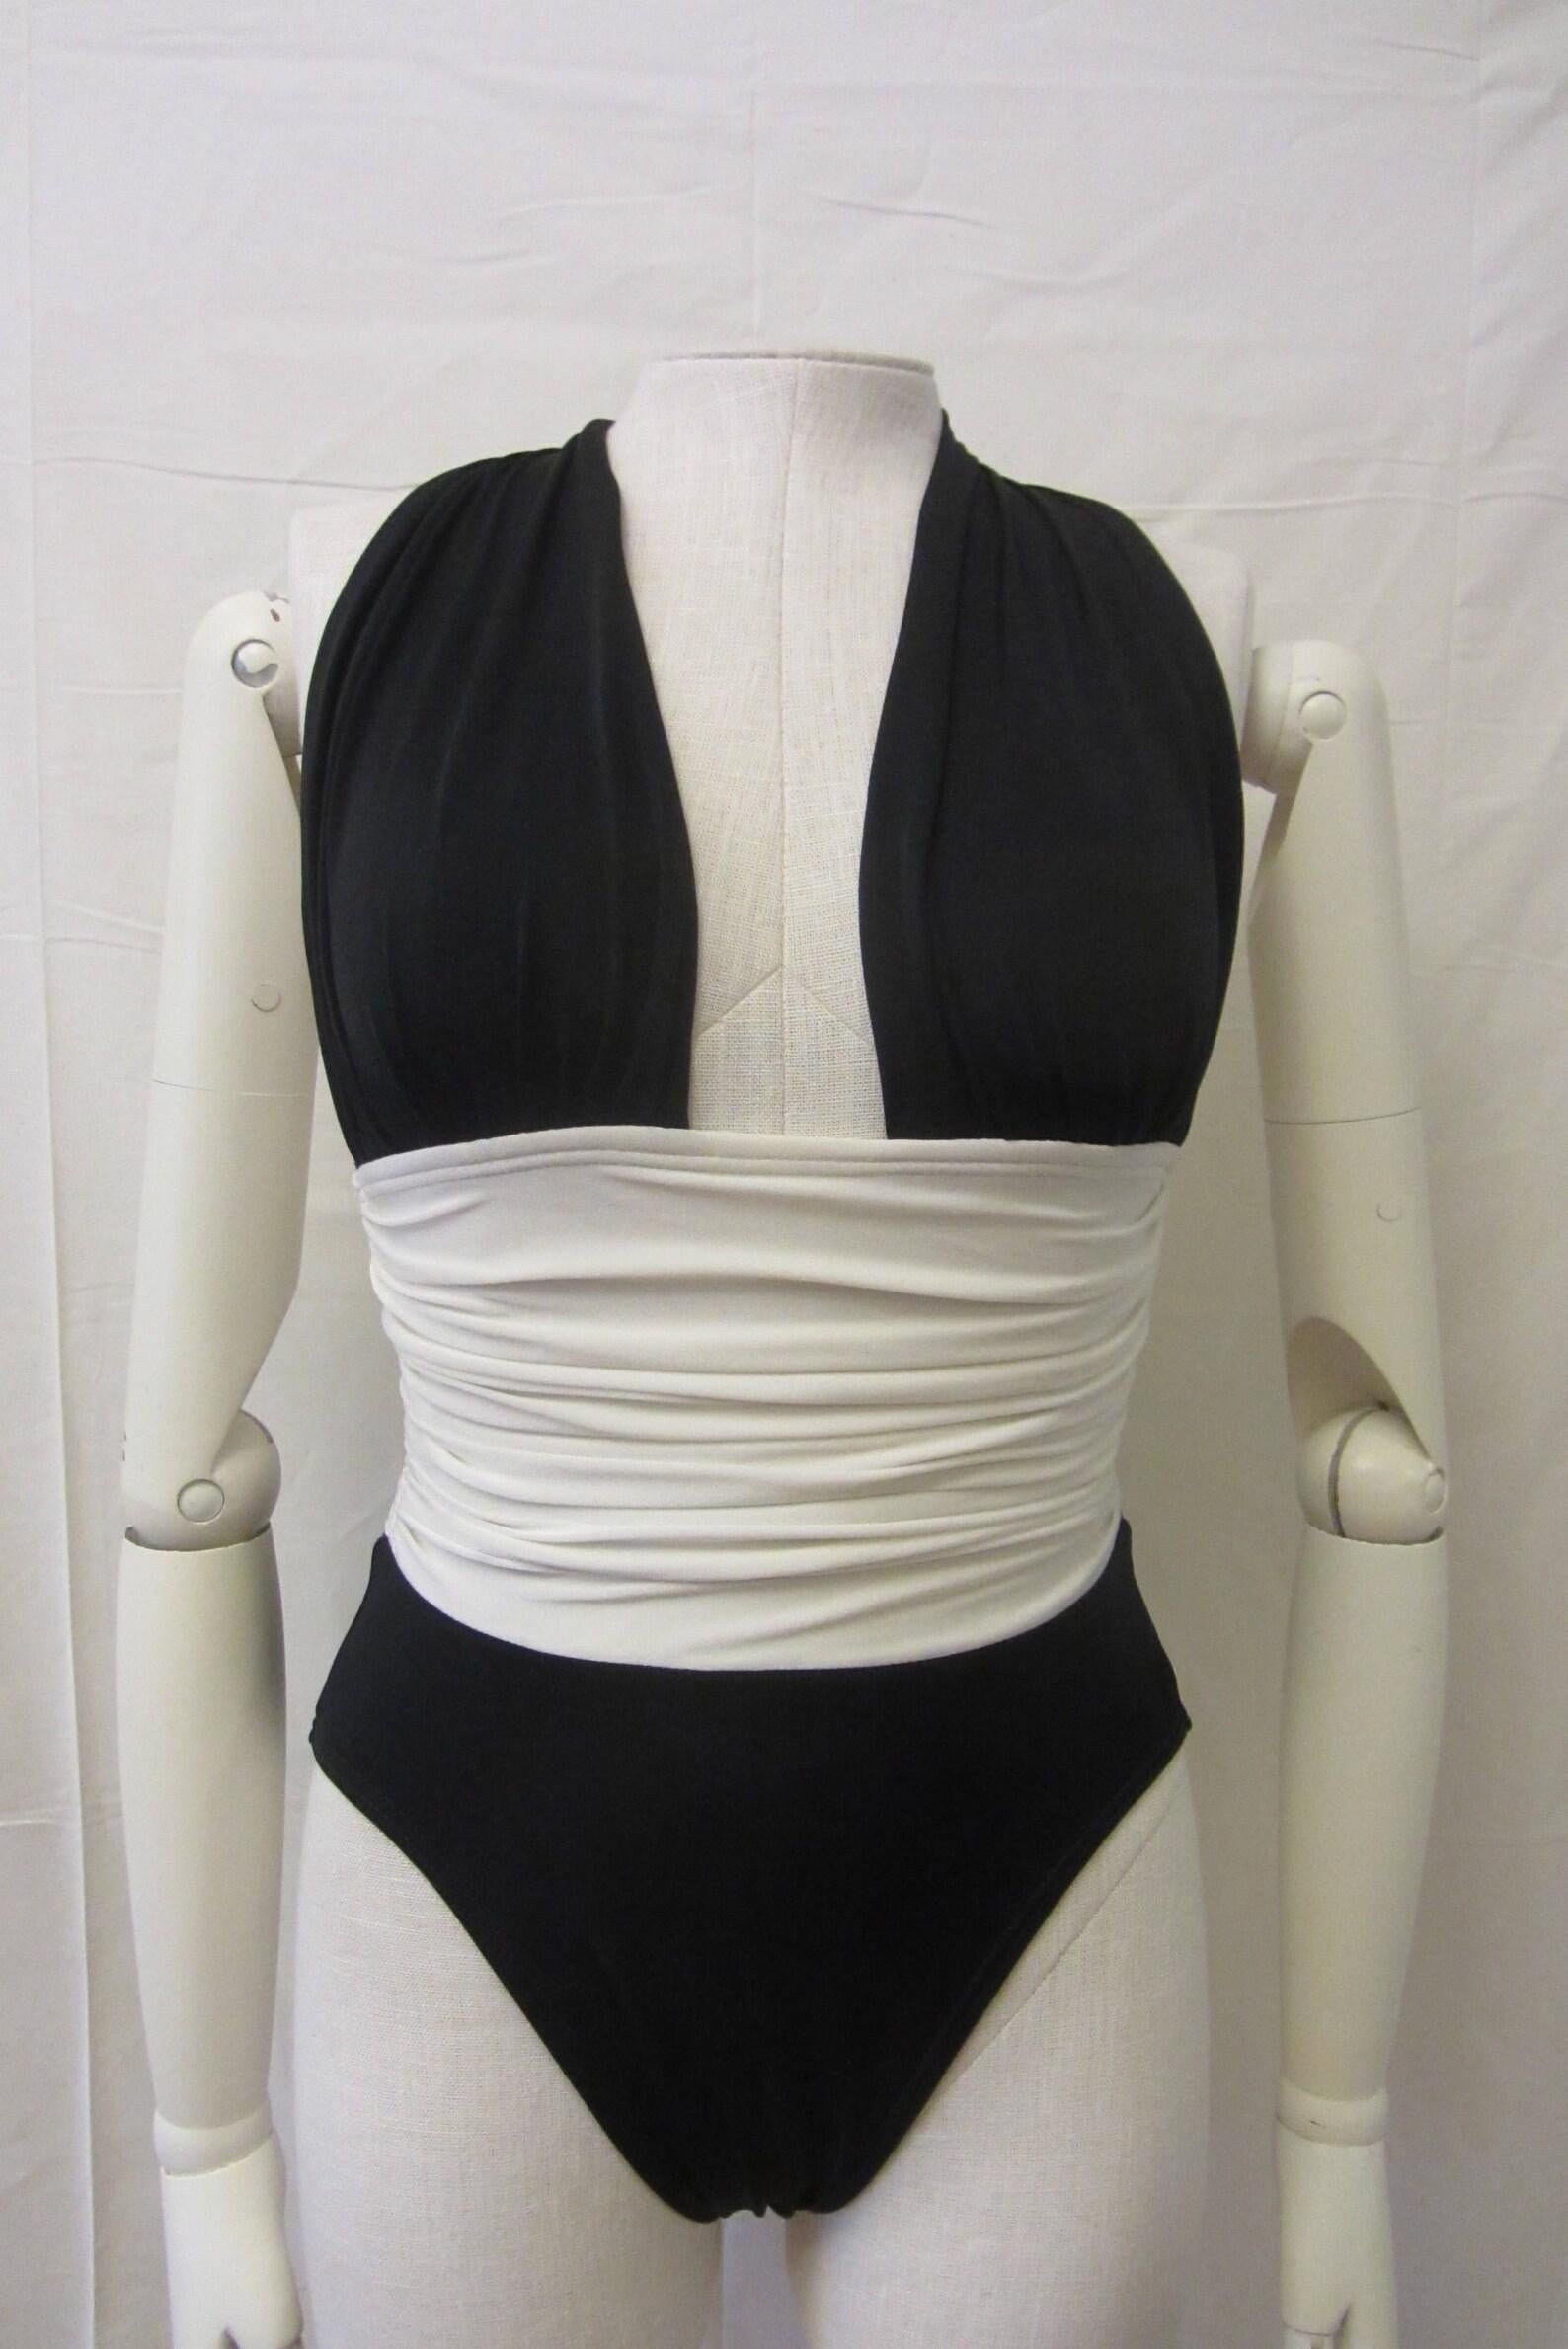 Gorgeous YSL one piece swimsuit!
Black and ivory white color blocking, plunging halter neck line, ruching at waist, high cut thigh, clasp closure at back neck.

A beautiful one piece from an Iconic Parisian Fashion House!

Circa Late 1970s/Early